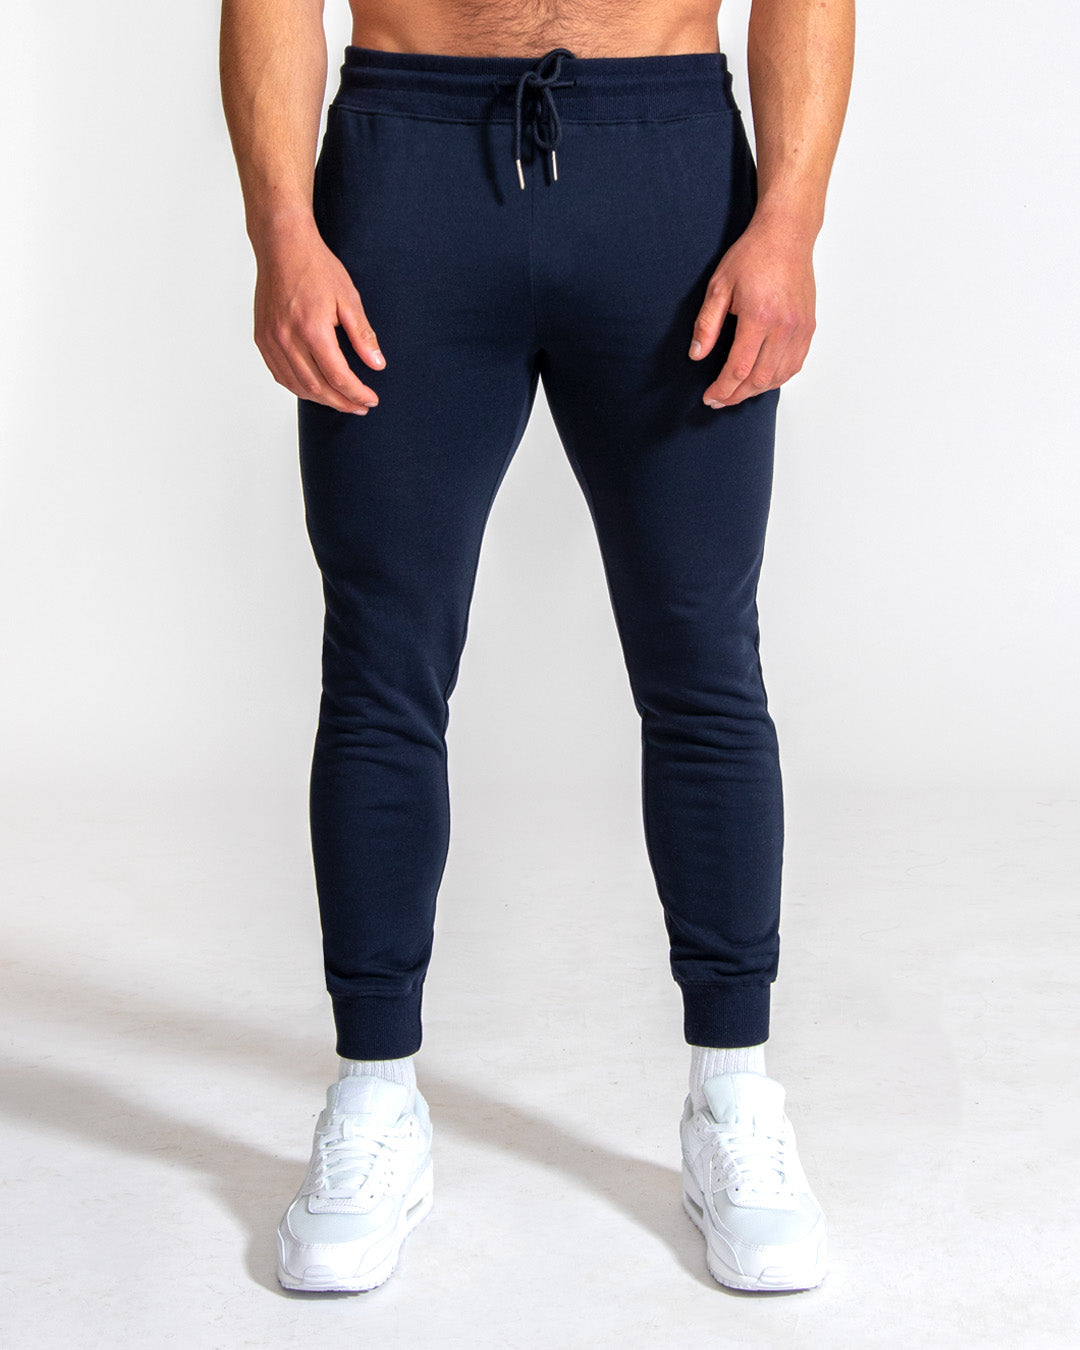 Men's Navy Muscle Fited French Terry Joggers | Muscle Fit Basics